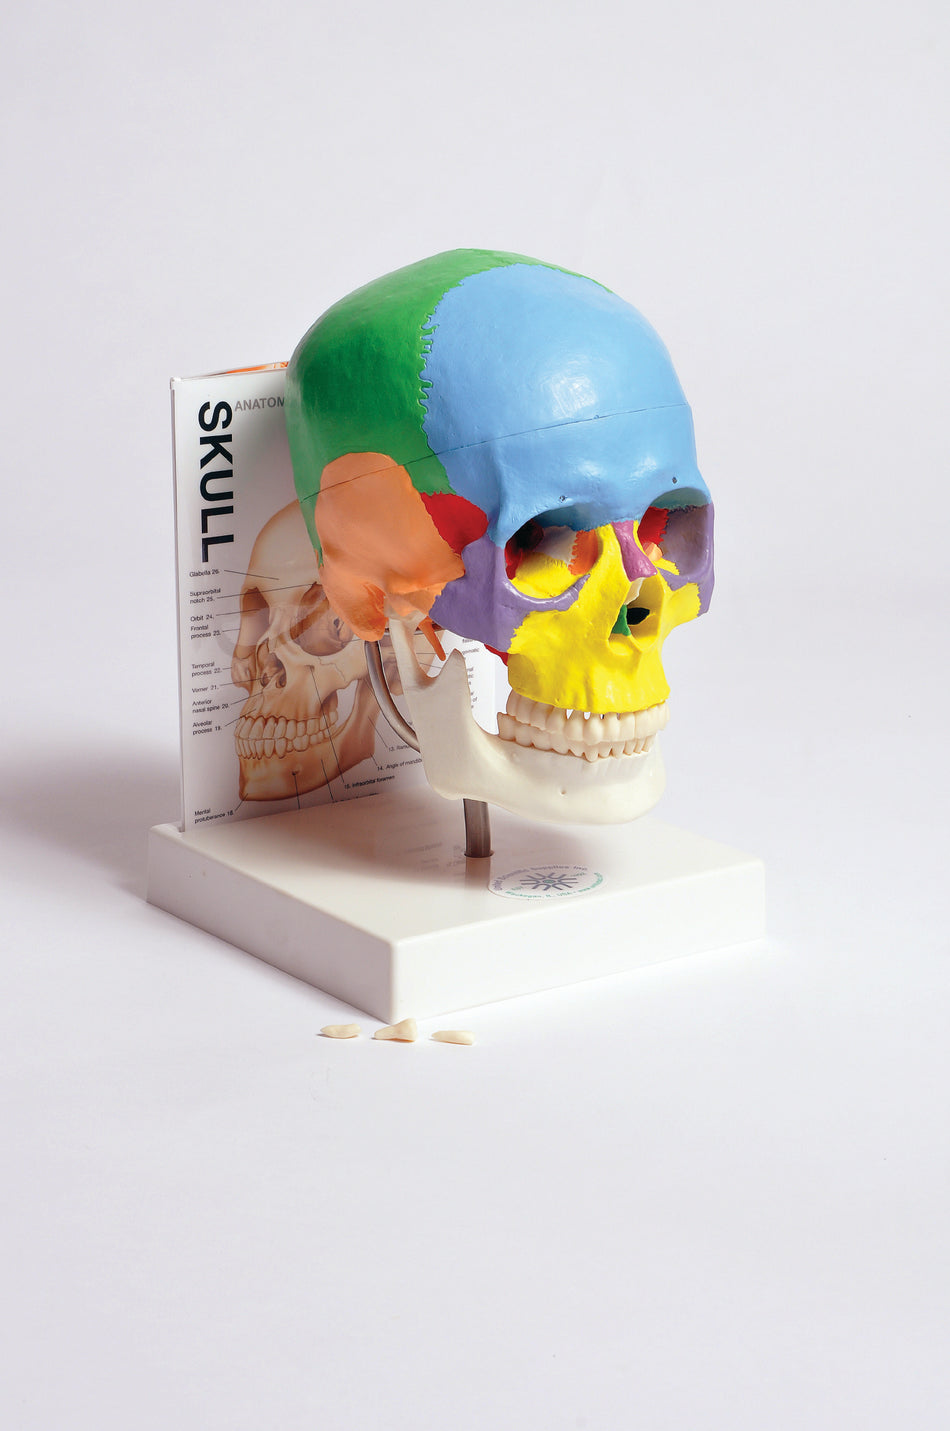 MASKU1 Human Skull Model with Fold-Out Guide